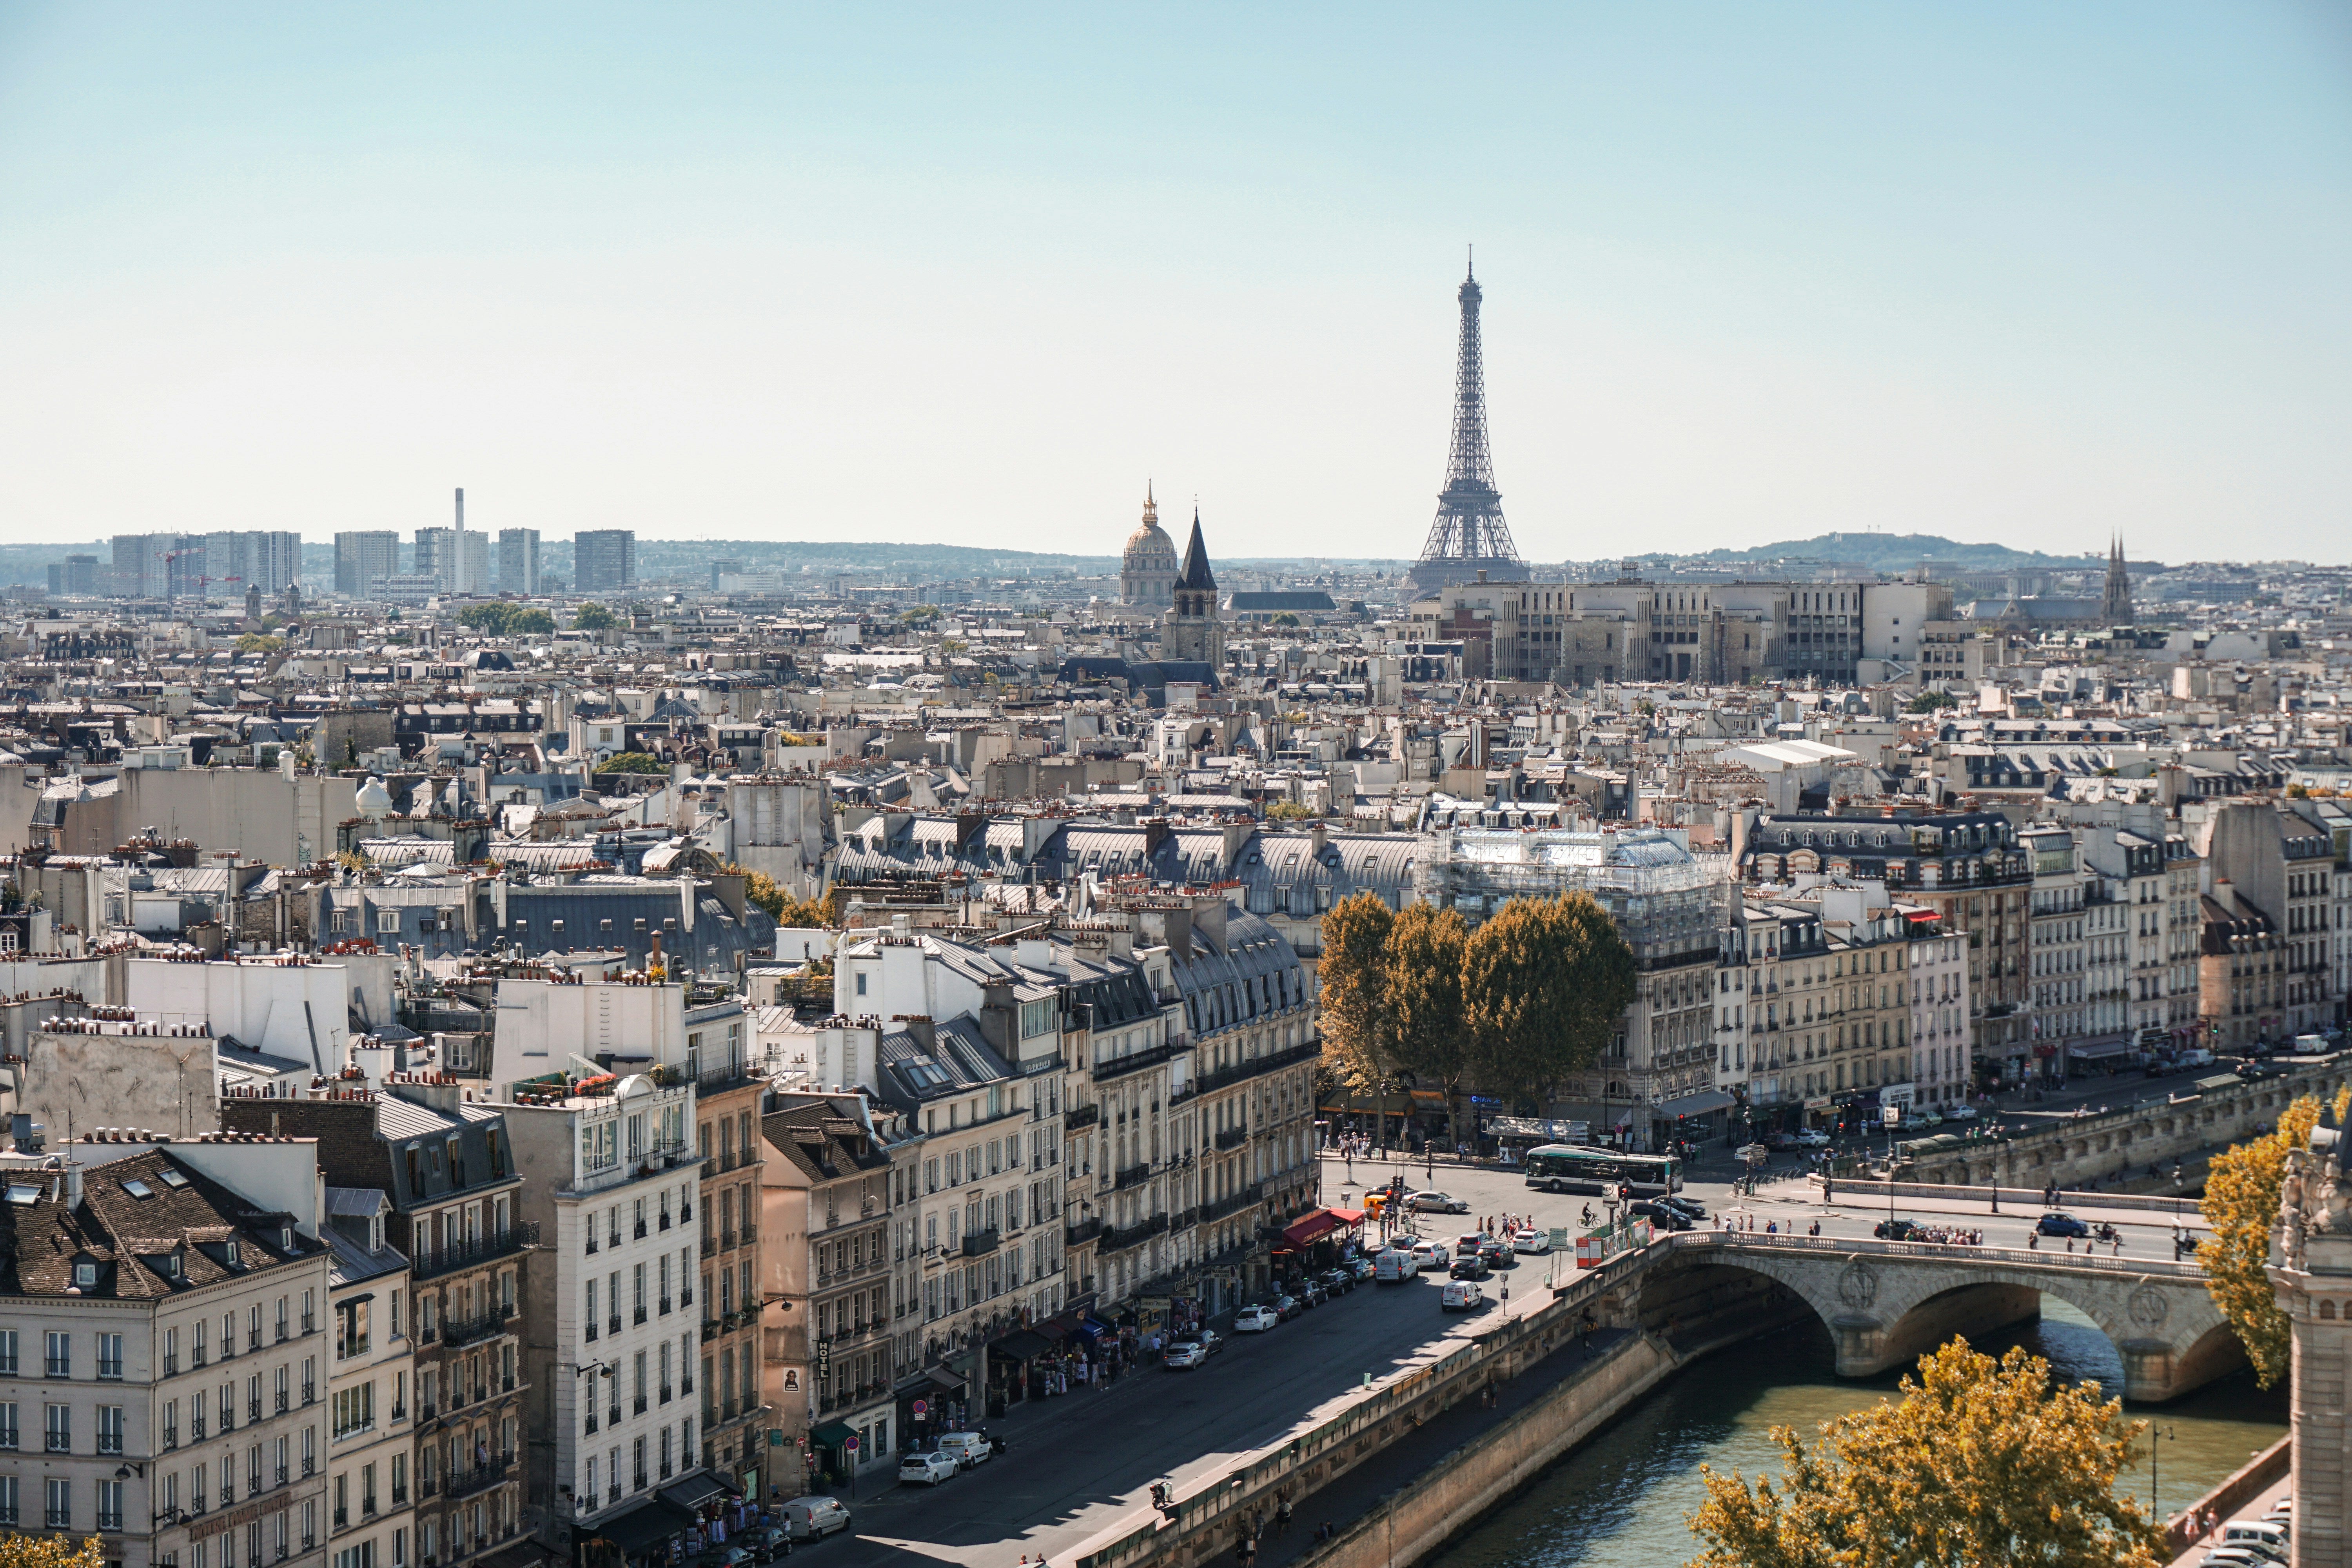 Paris remains one of the world’s most visited cities